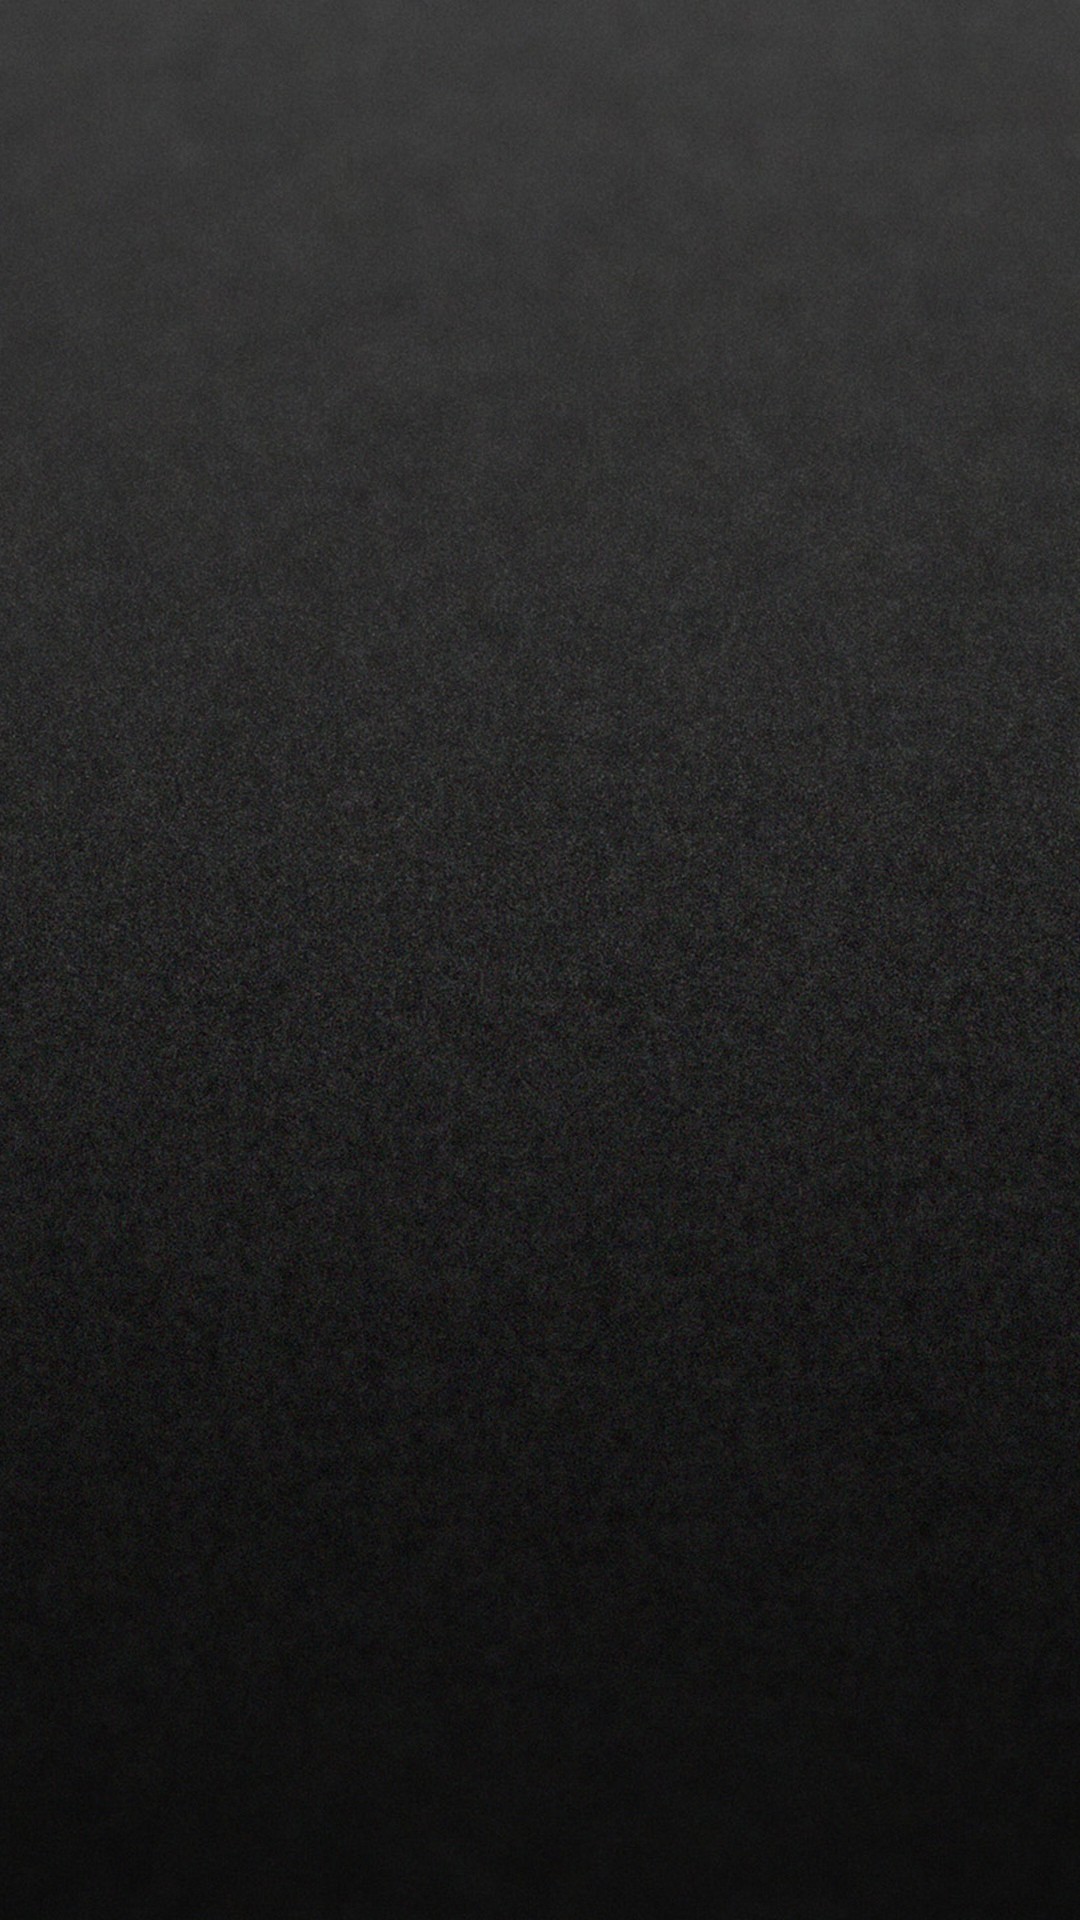 Background For Galaxy S4 With Gray Gradient Carbon Pattern 1080x1920